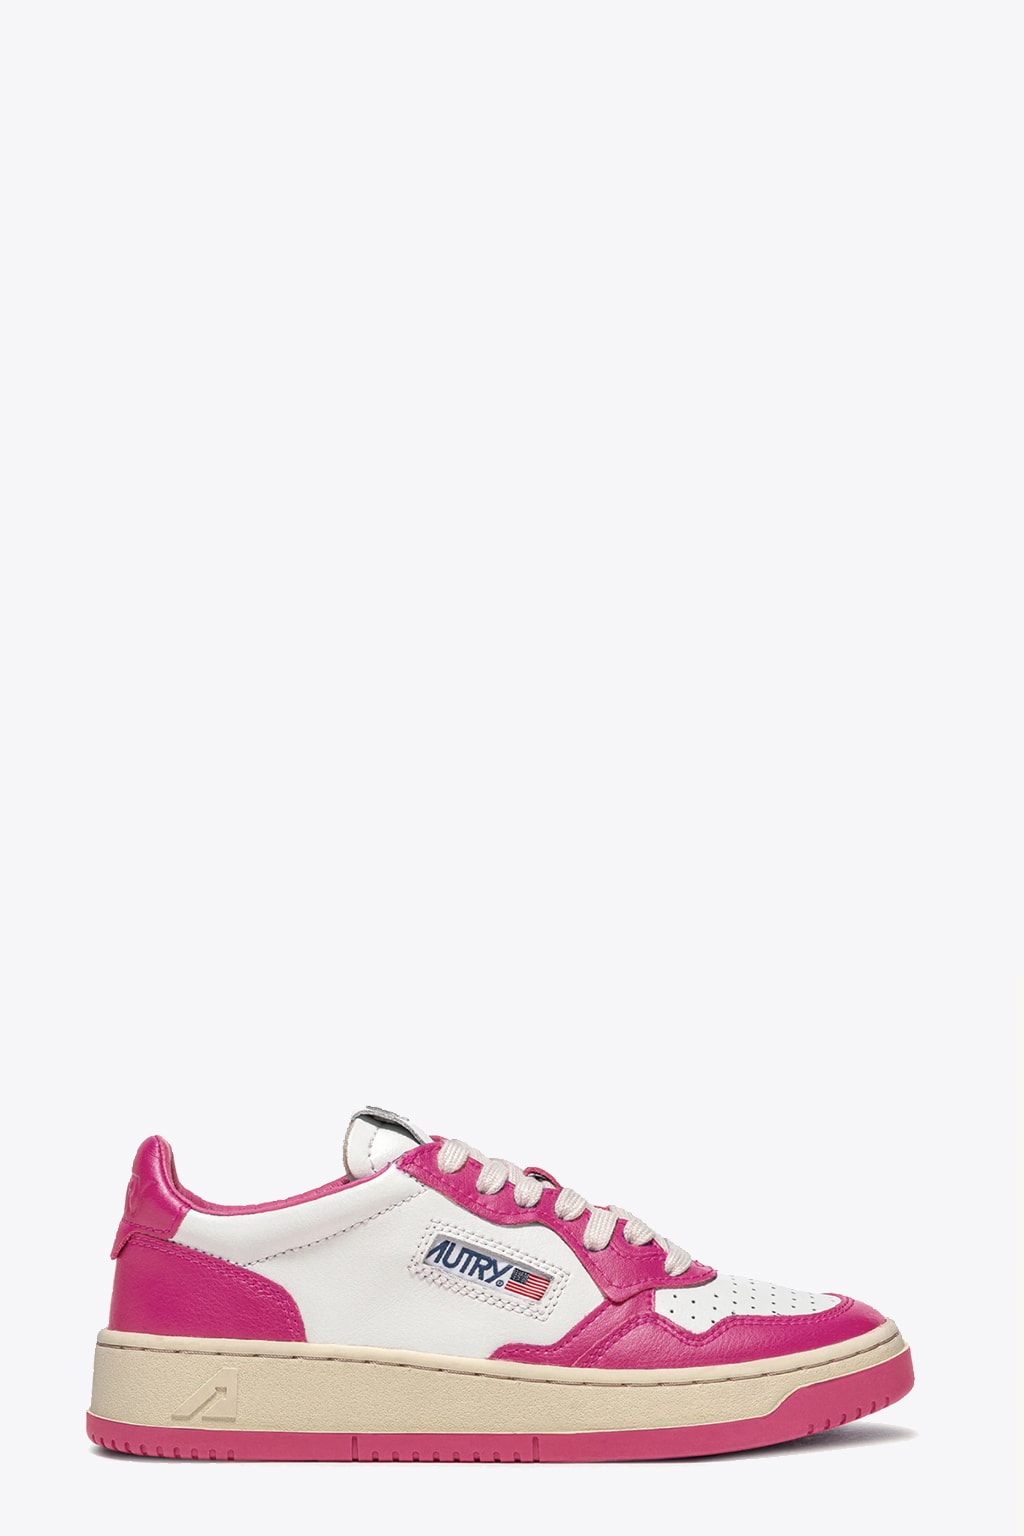 Autry 01 Low Wom Leat Bubble White and pink leather low sneaker - Medalist